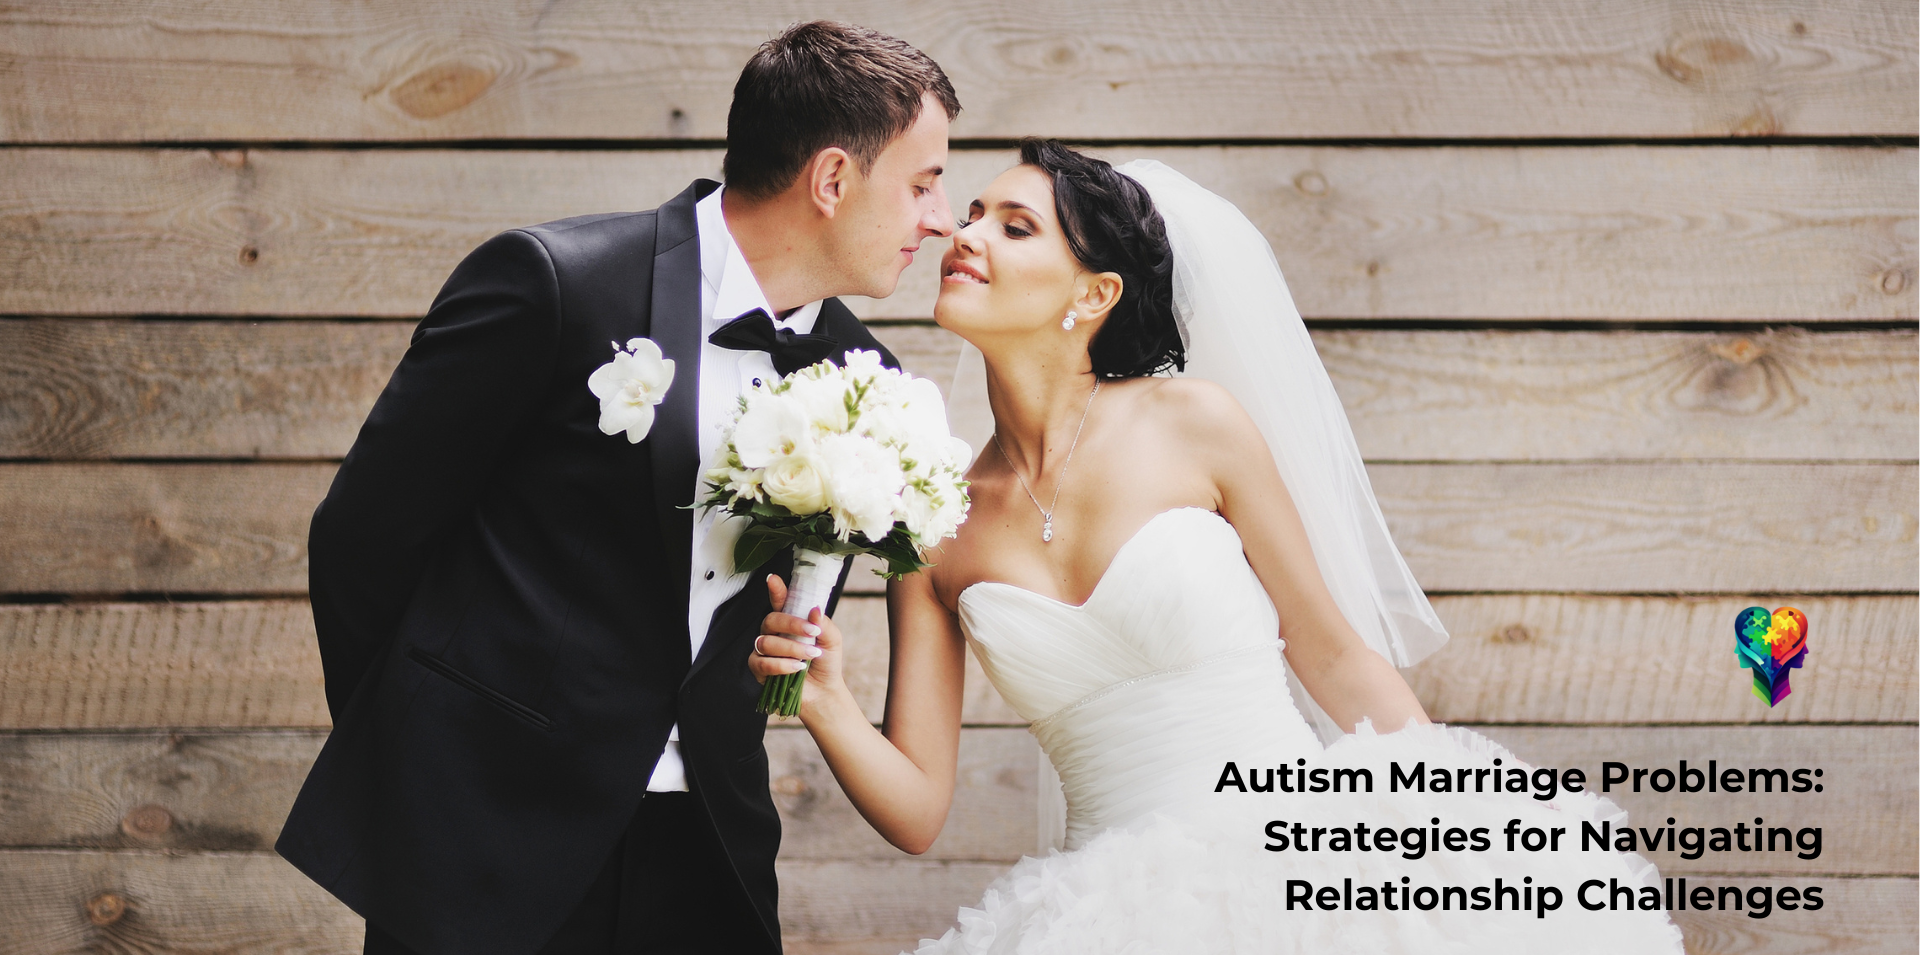 Autism Marriage Problems: Strategies for Navigating Neurodiverse Relationships